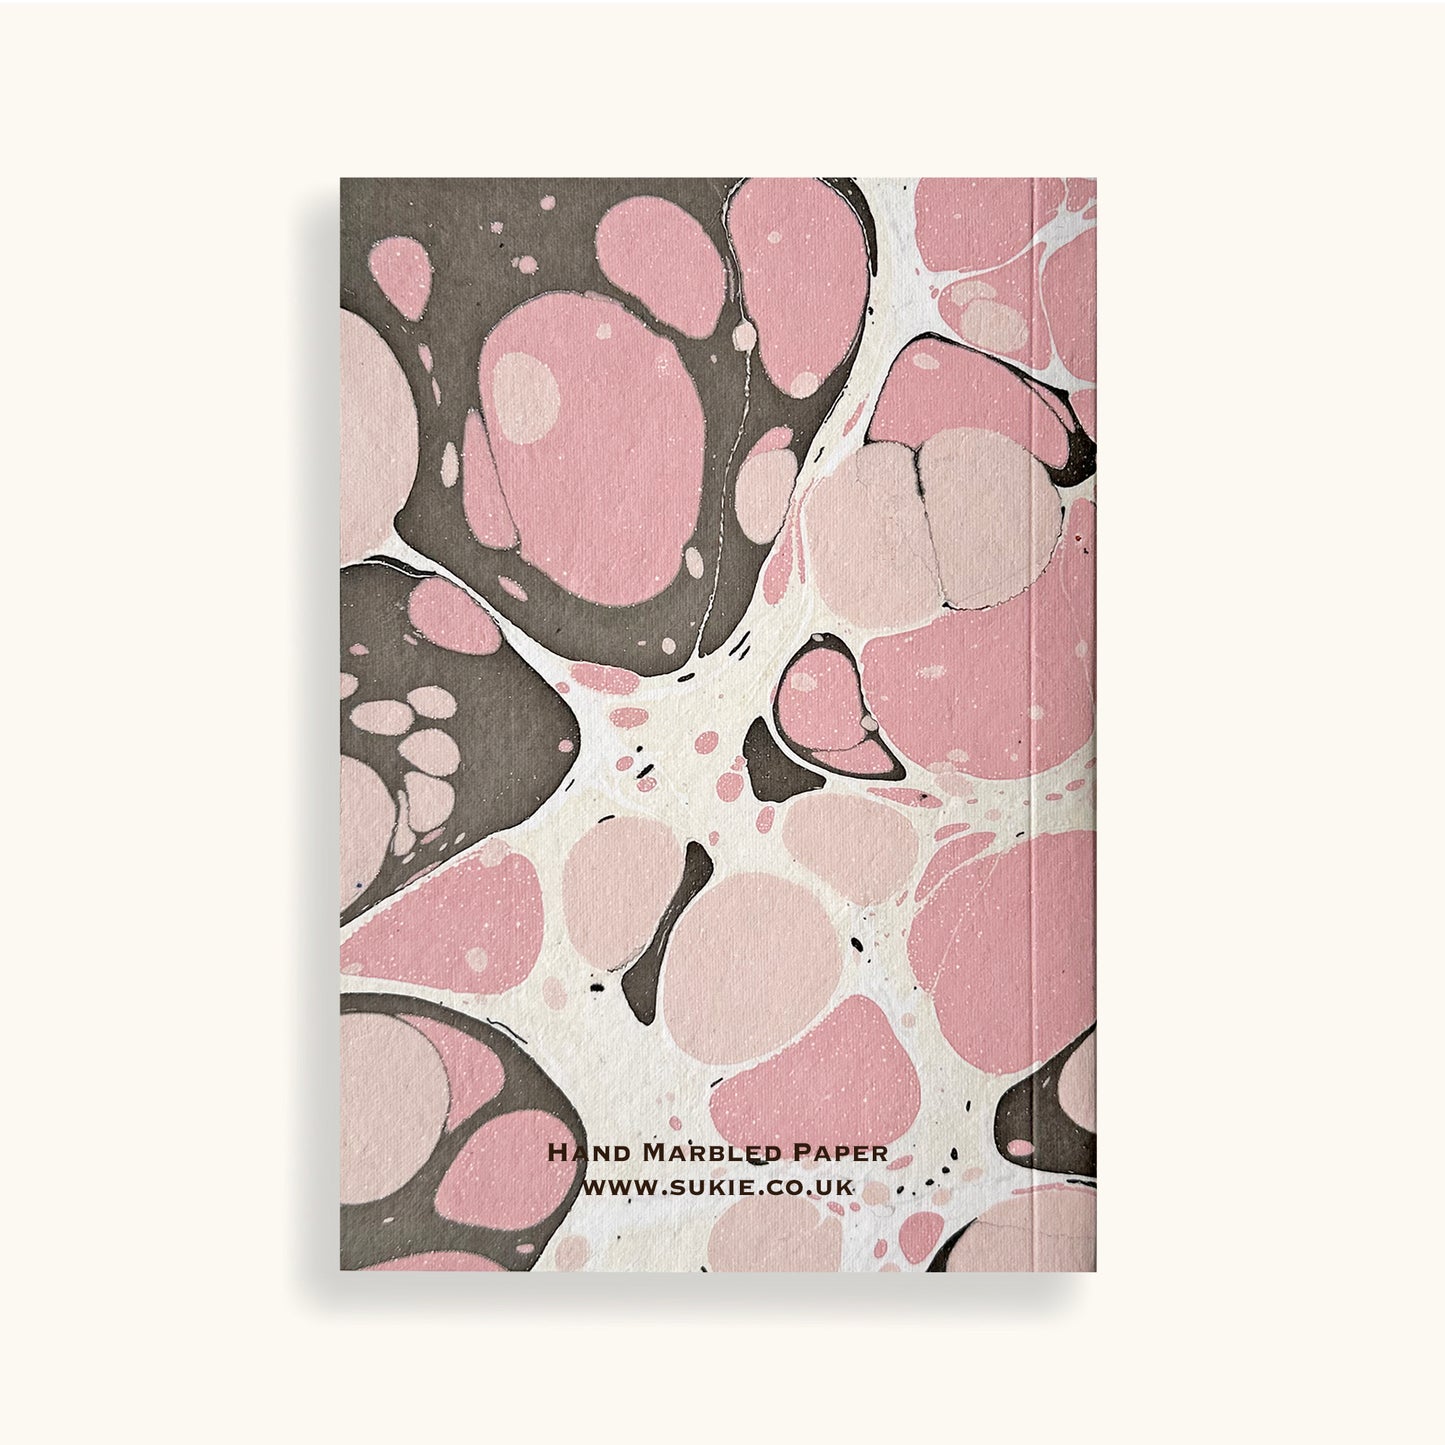 Load image into Gallery viewer, Hand Marbled Journal In Pink - Sukie
